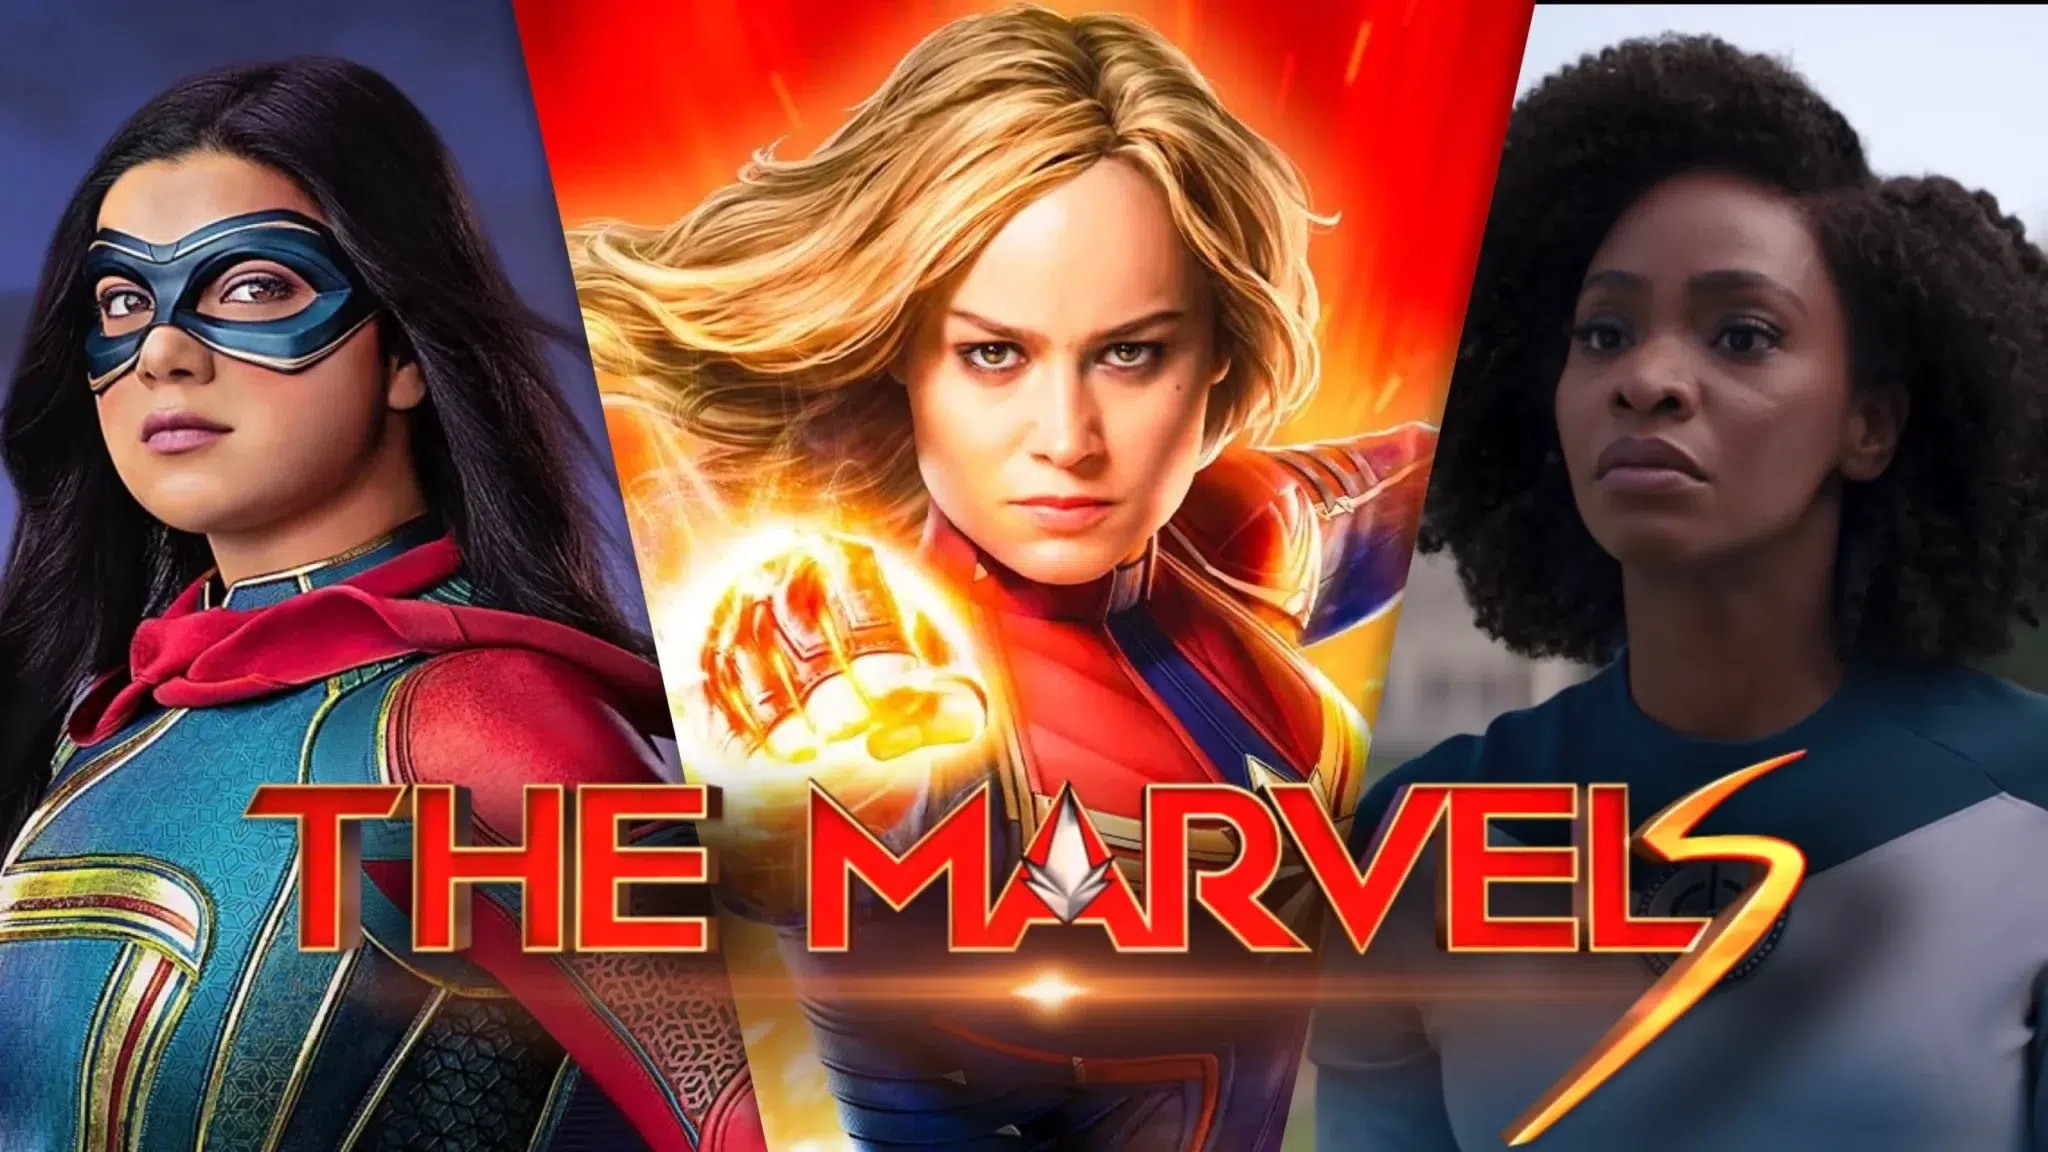 Behind the Scenes Drama: Will Brie Larson’s Behavior Delay ‘The Marvels’ Release?